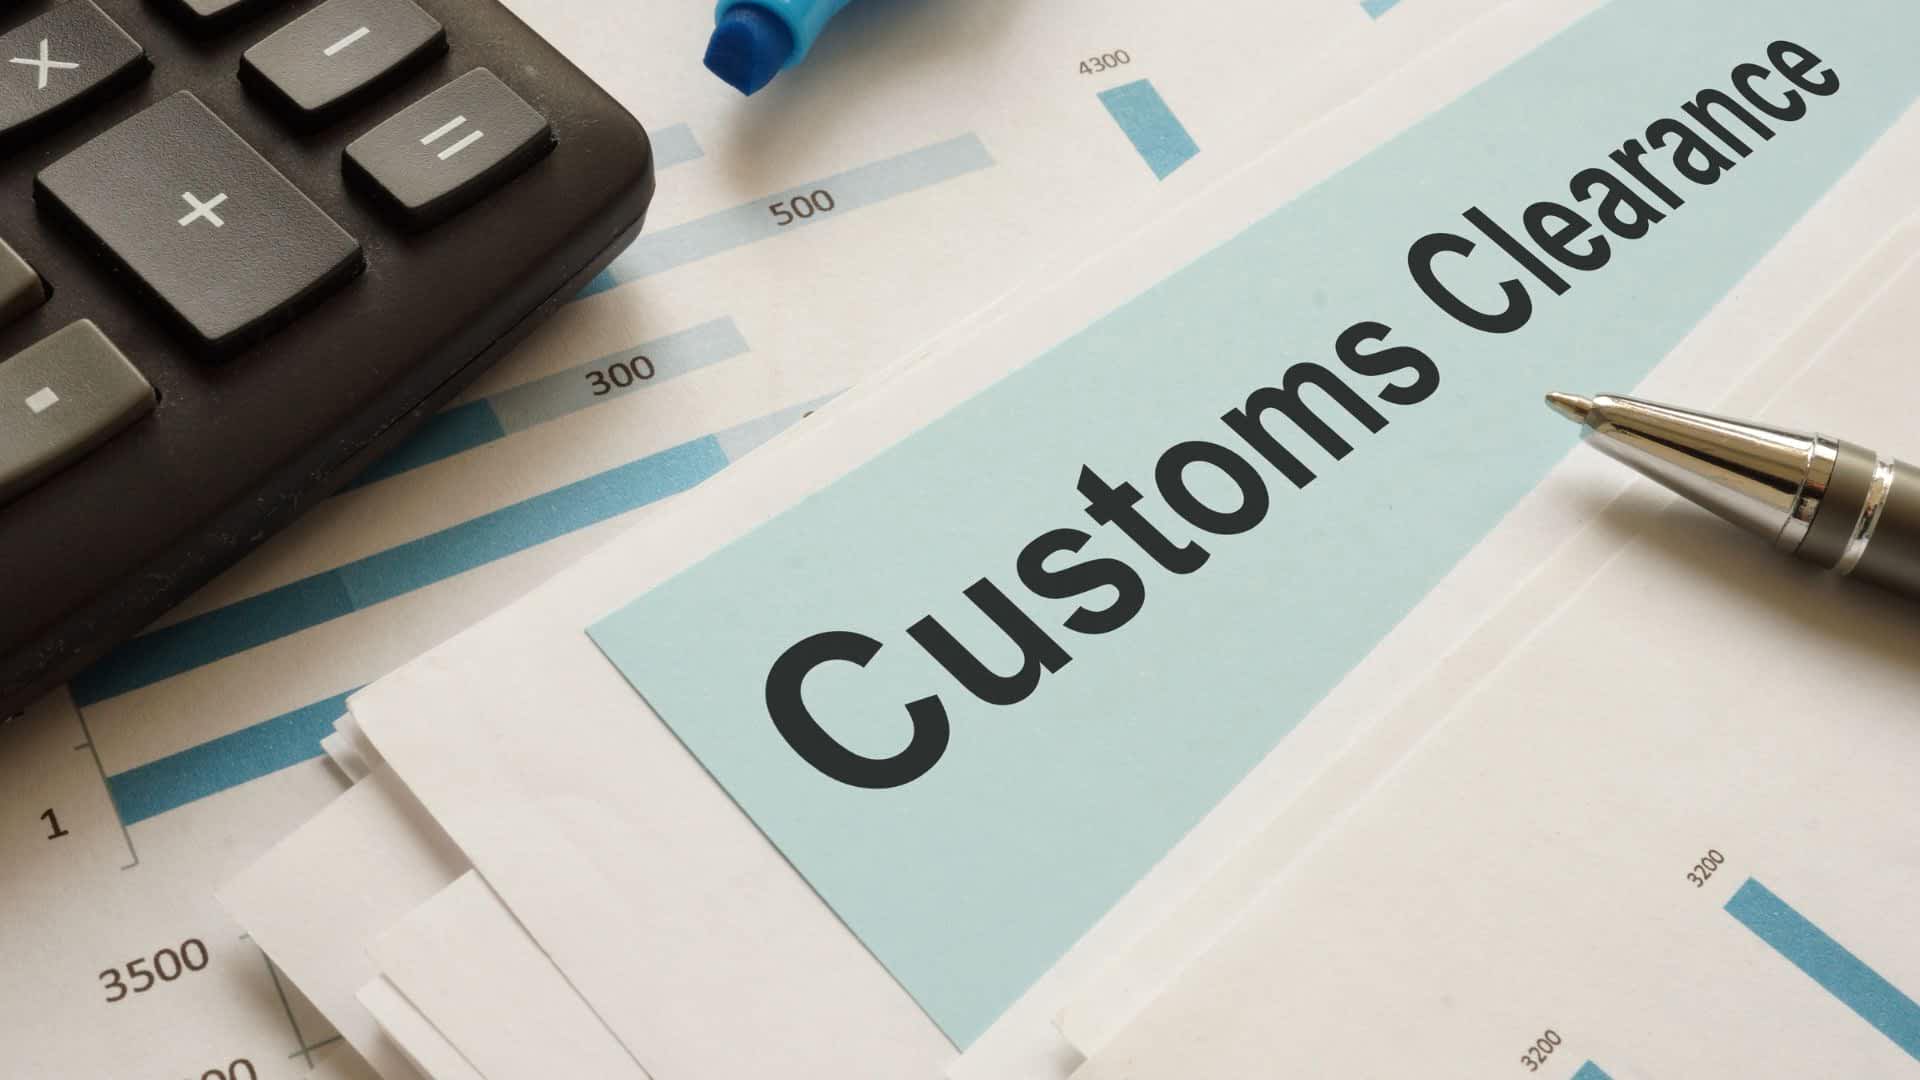 This Image of Custom Clearance Services Service page